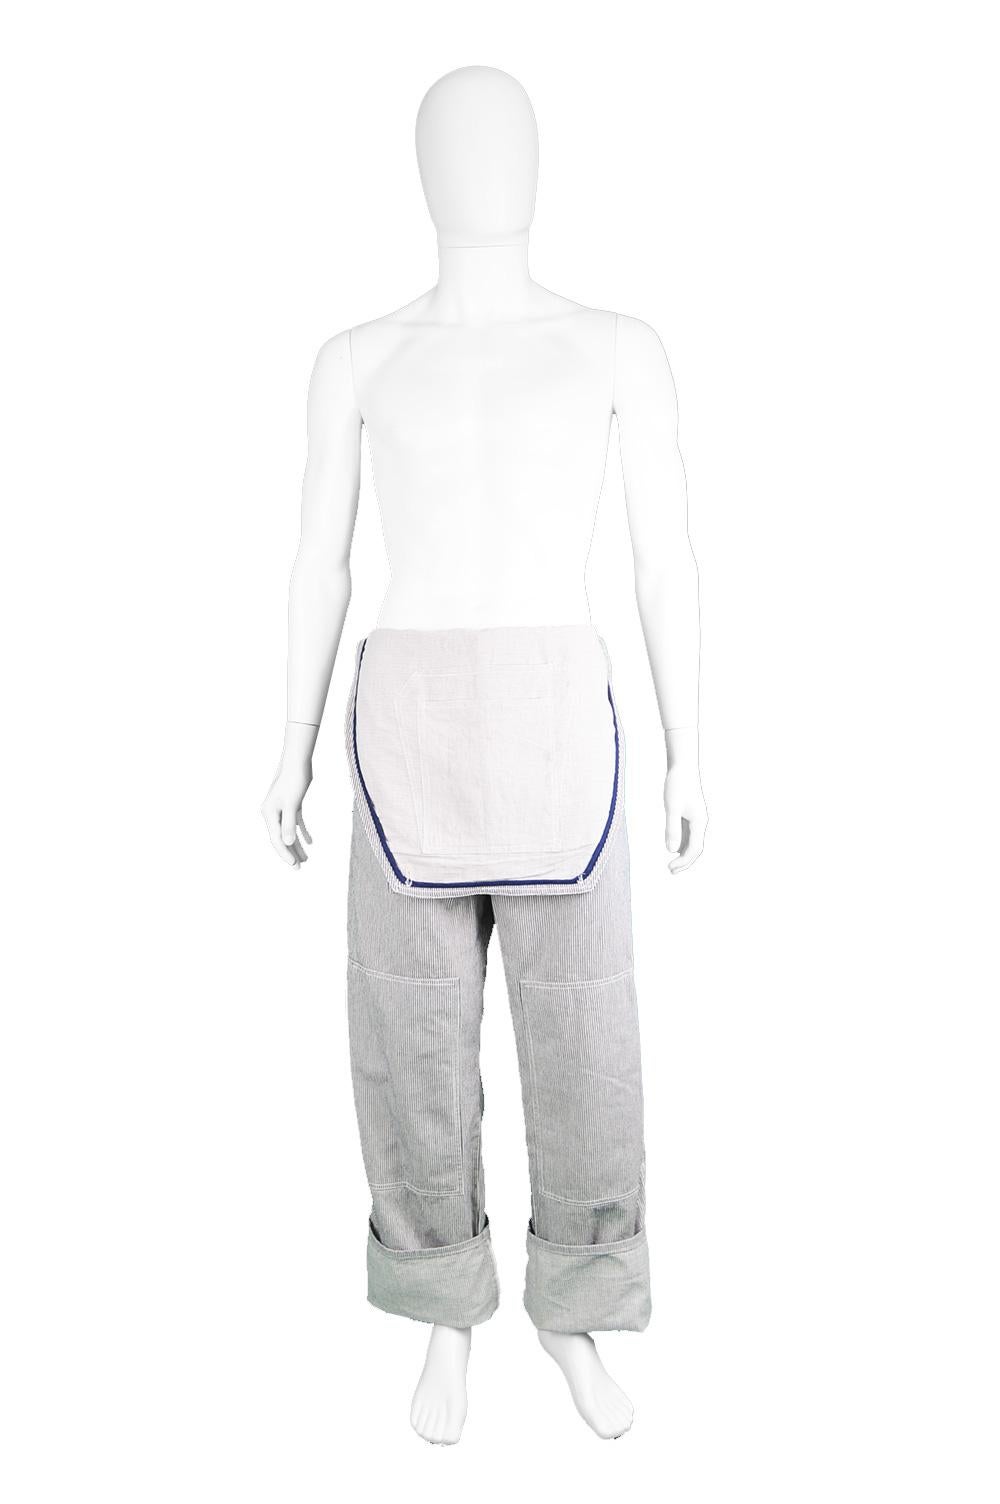 Alexander McQueen Men's Pinstripe Cotton Overall Pants with Bib Front

Size: Waist - 36” / 91cm
Inside Leg - 33” / 84cm (meant to be cuffed)
Length (Waist to Hem) - 44” / 112cm
Rise - 14” / 35cm

Condition: Excellent Preowned Condition - Very light